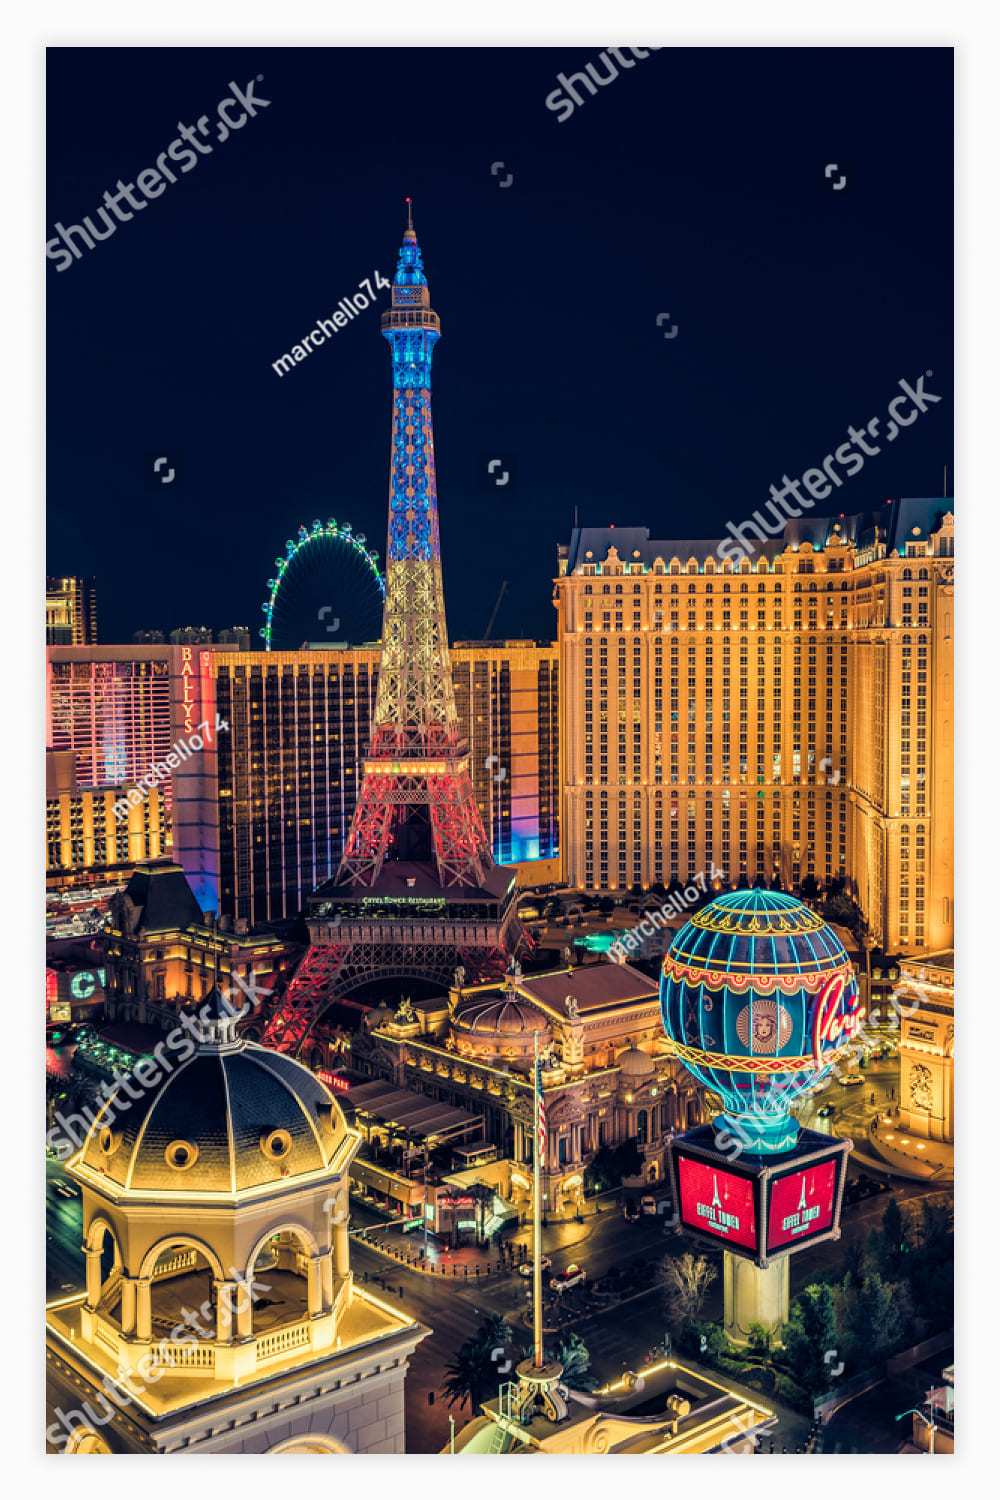 Illuminated hotels and casinos by the strip at night, Nevada, USA..